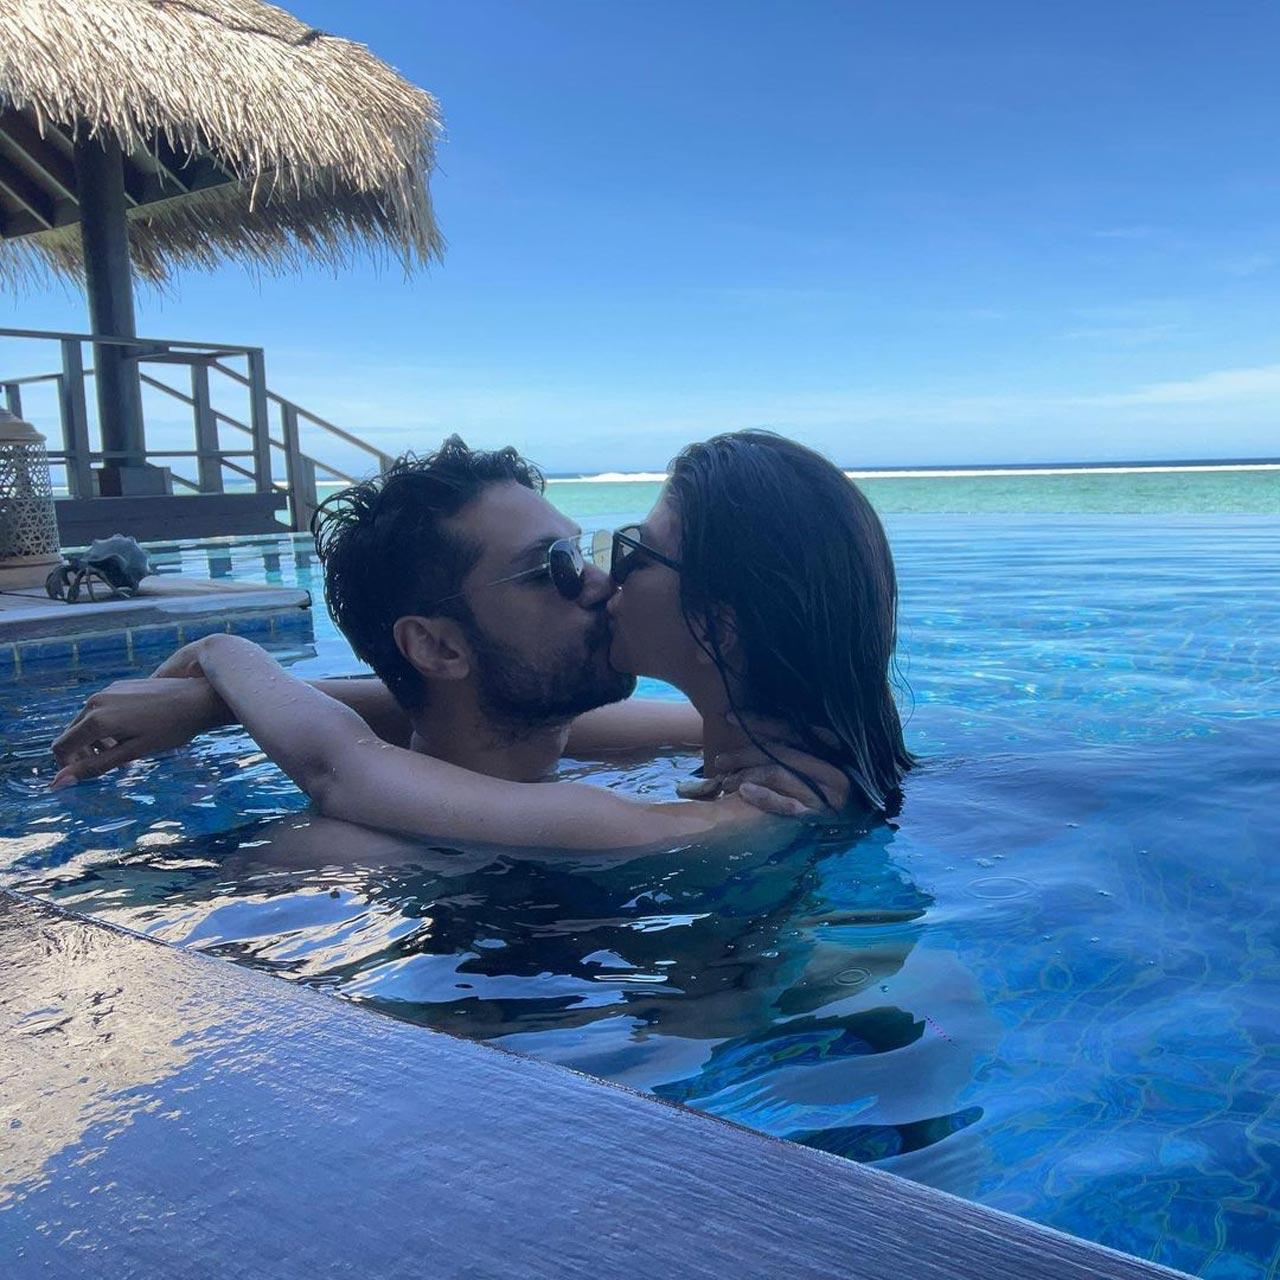 The couple has been in a relationship for seven years and has been planning to get married for some time. Their wedding will be a three-day affair in Mumbai in the presence of family and friends. 'Ten days till we say “I do” [sic]' shared Arjun and Carla on social media